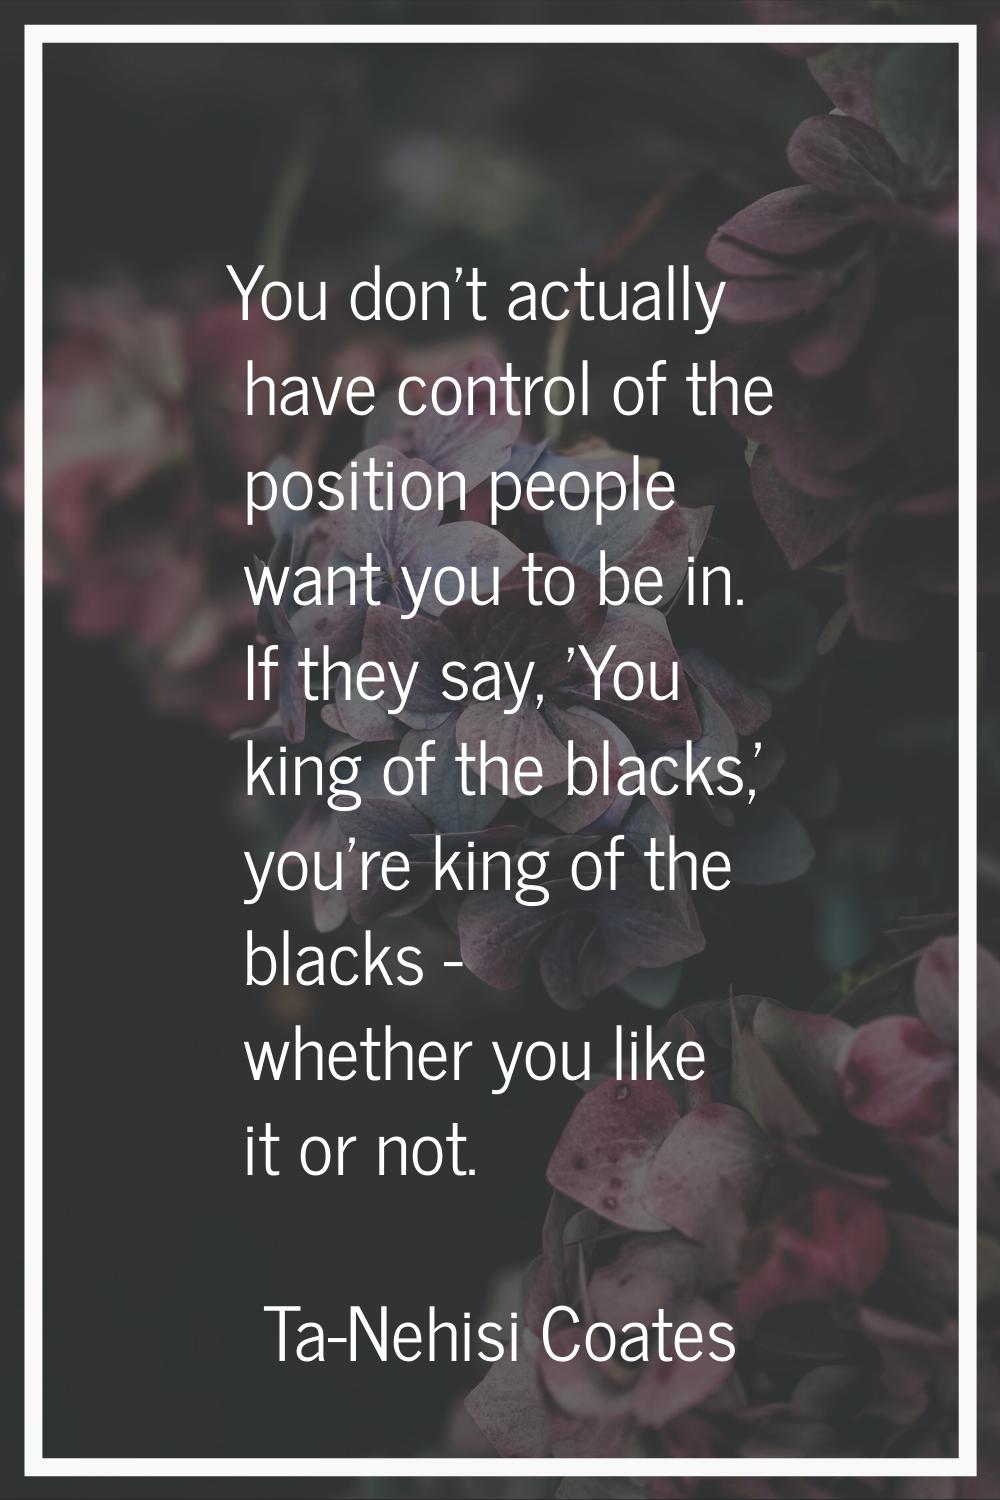 You don't actually have control of the position people want you to be in. If they say, 'You king of